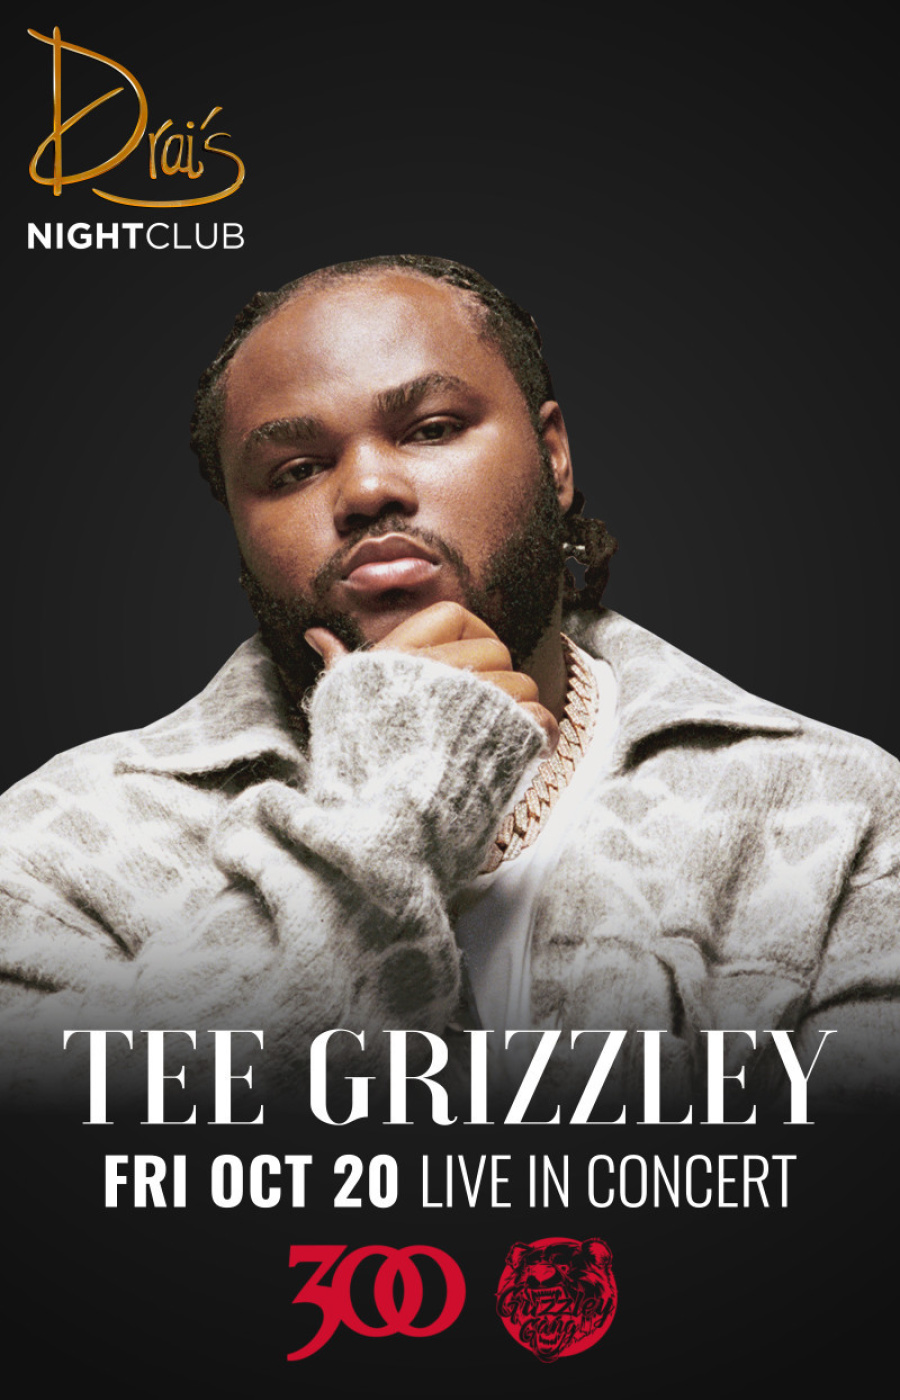 Tee Grizzley - Afterlife [Official Audio] 